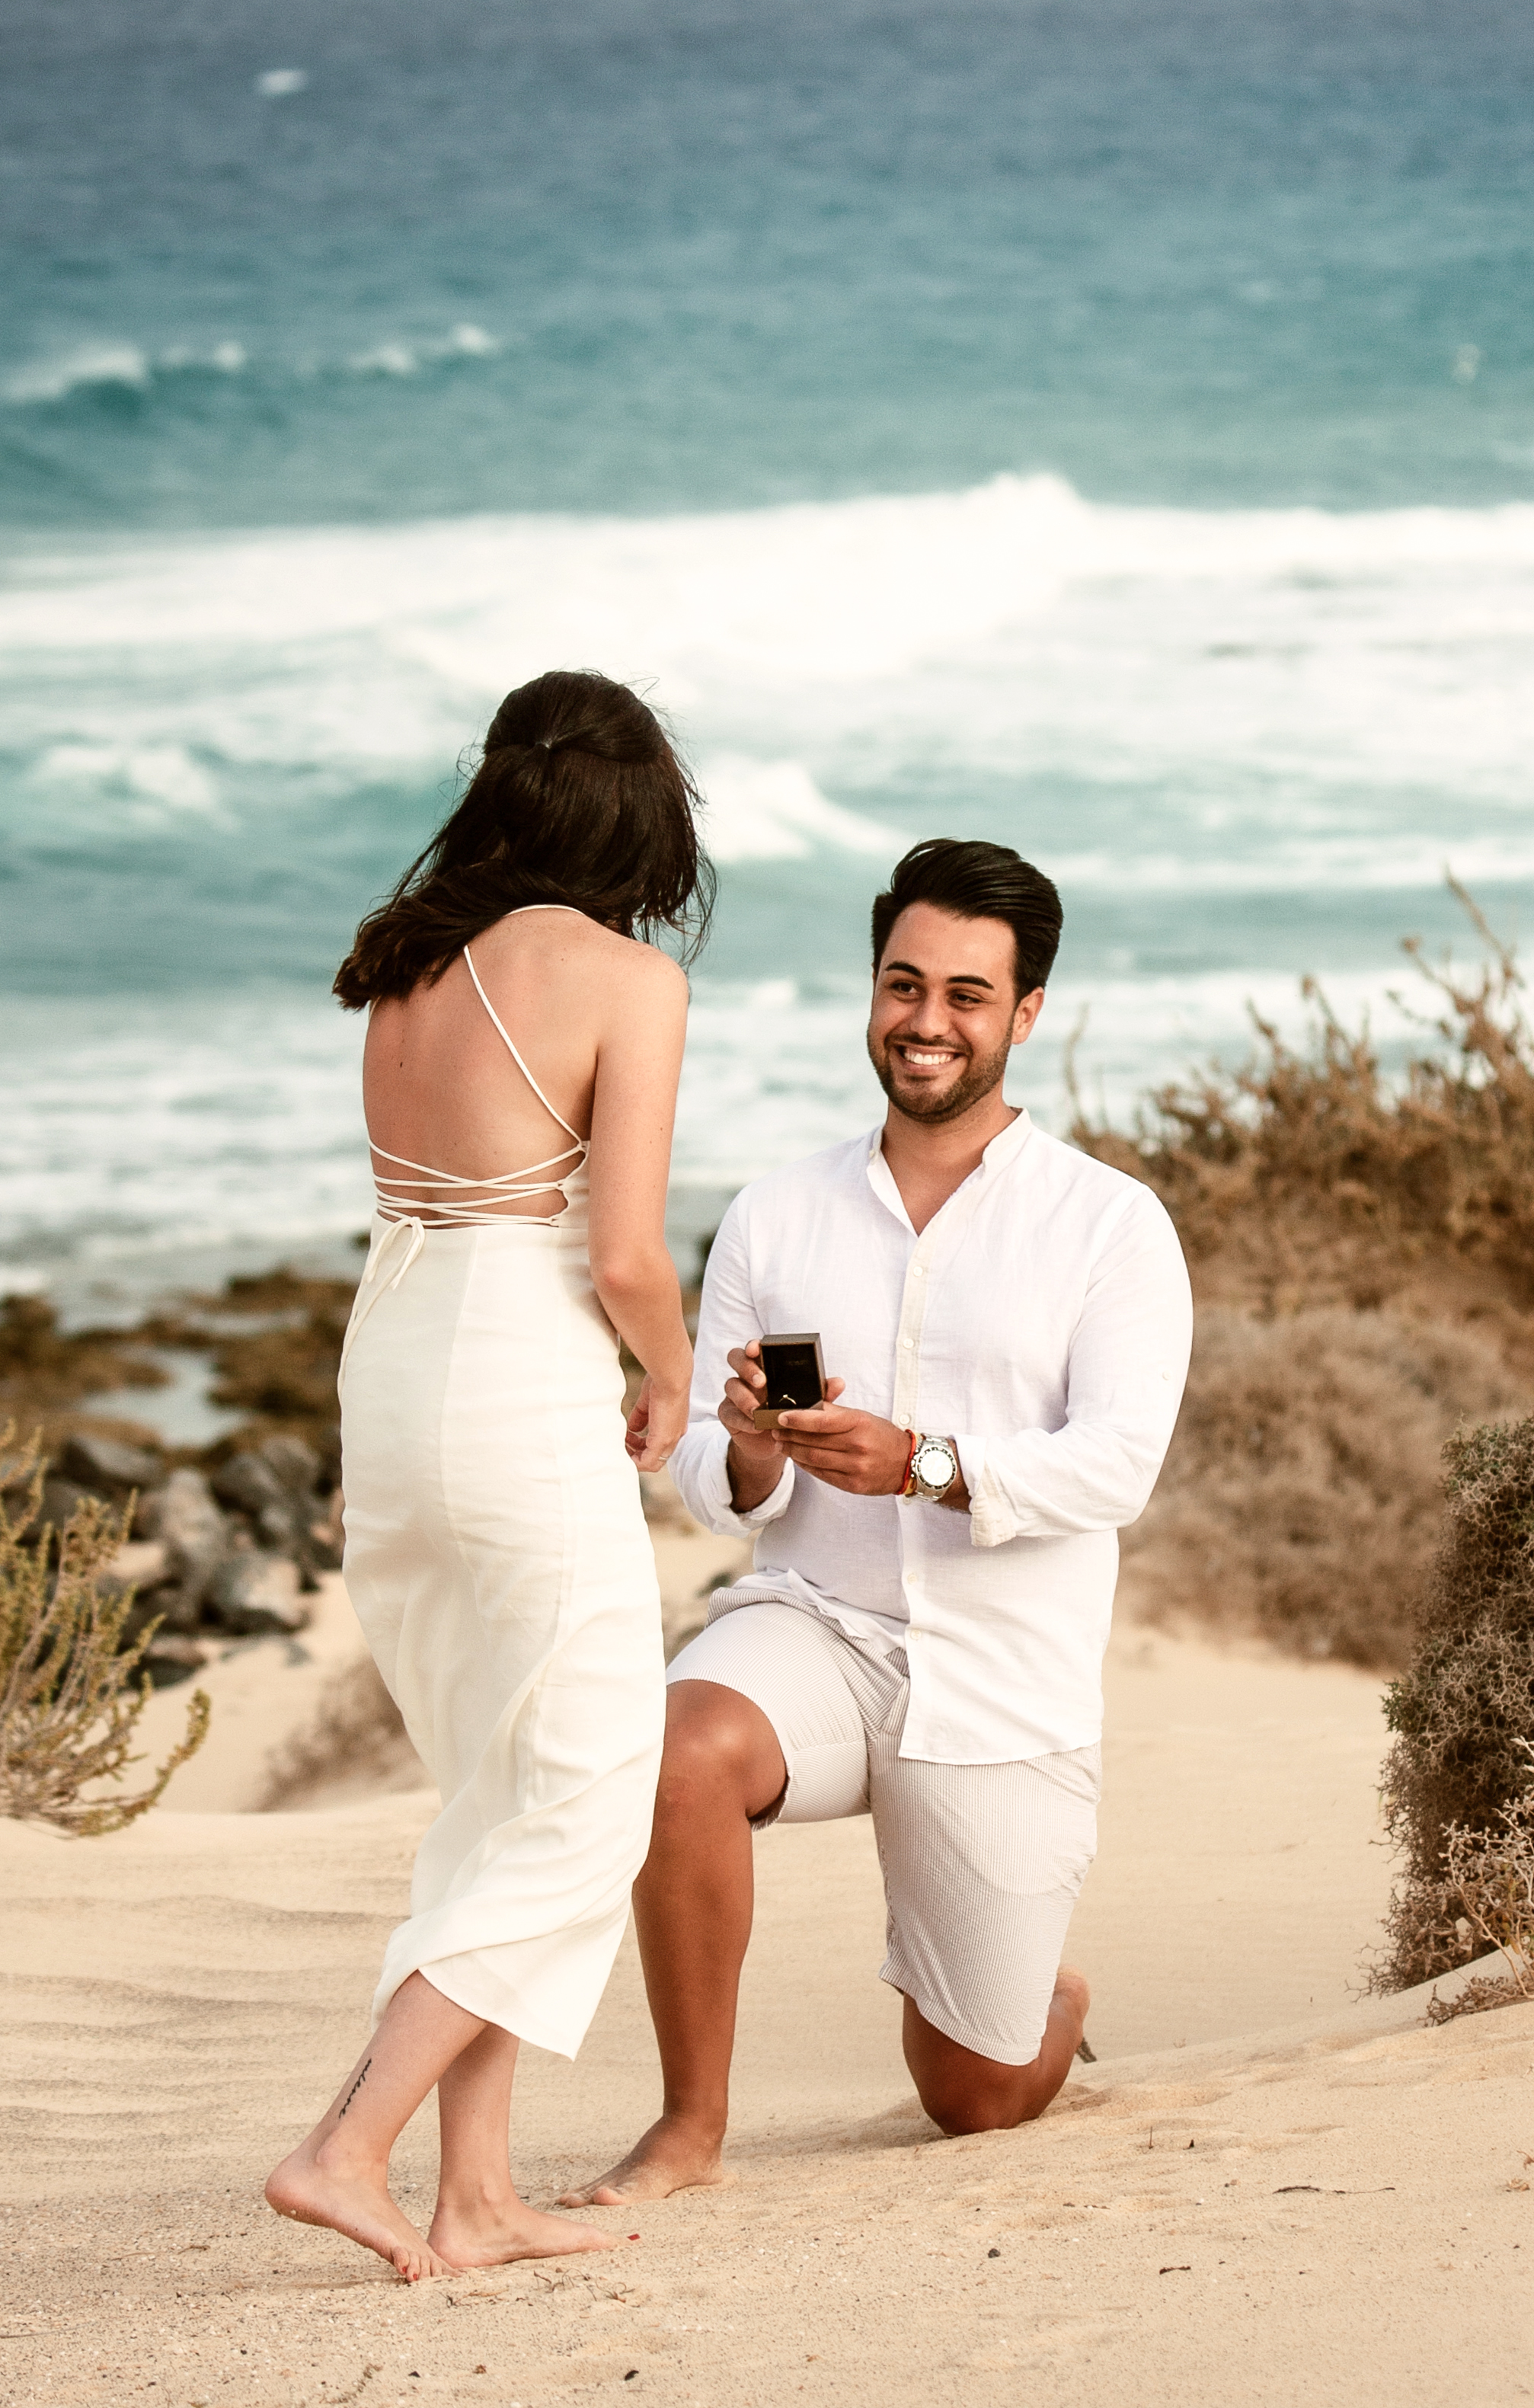 Grandes Playas - Dunes of Corralejo proposal photography: Fuerteventura photographer captures beautiful moment of man proposing to future wife and she says yes